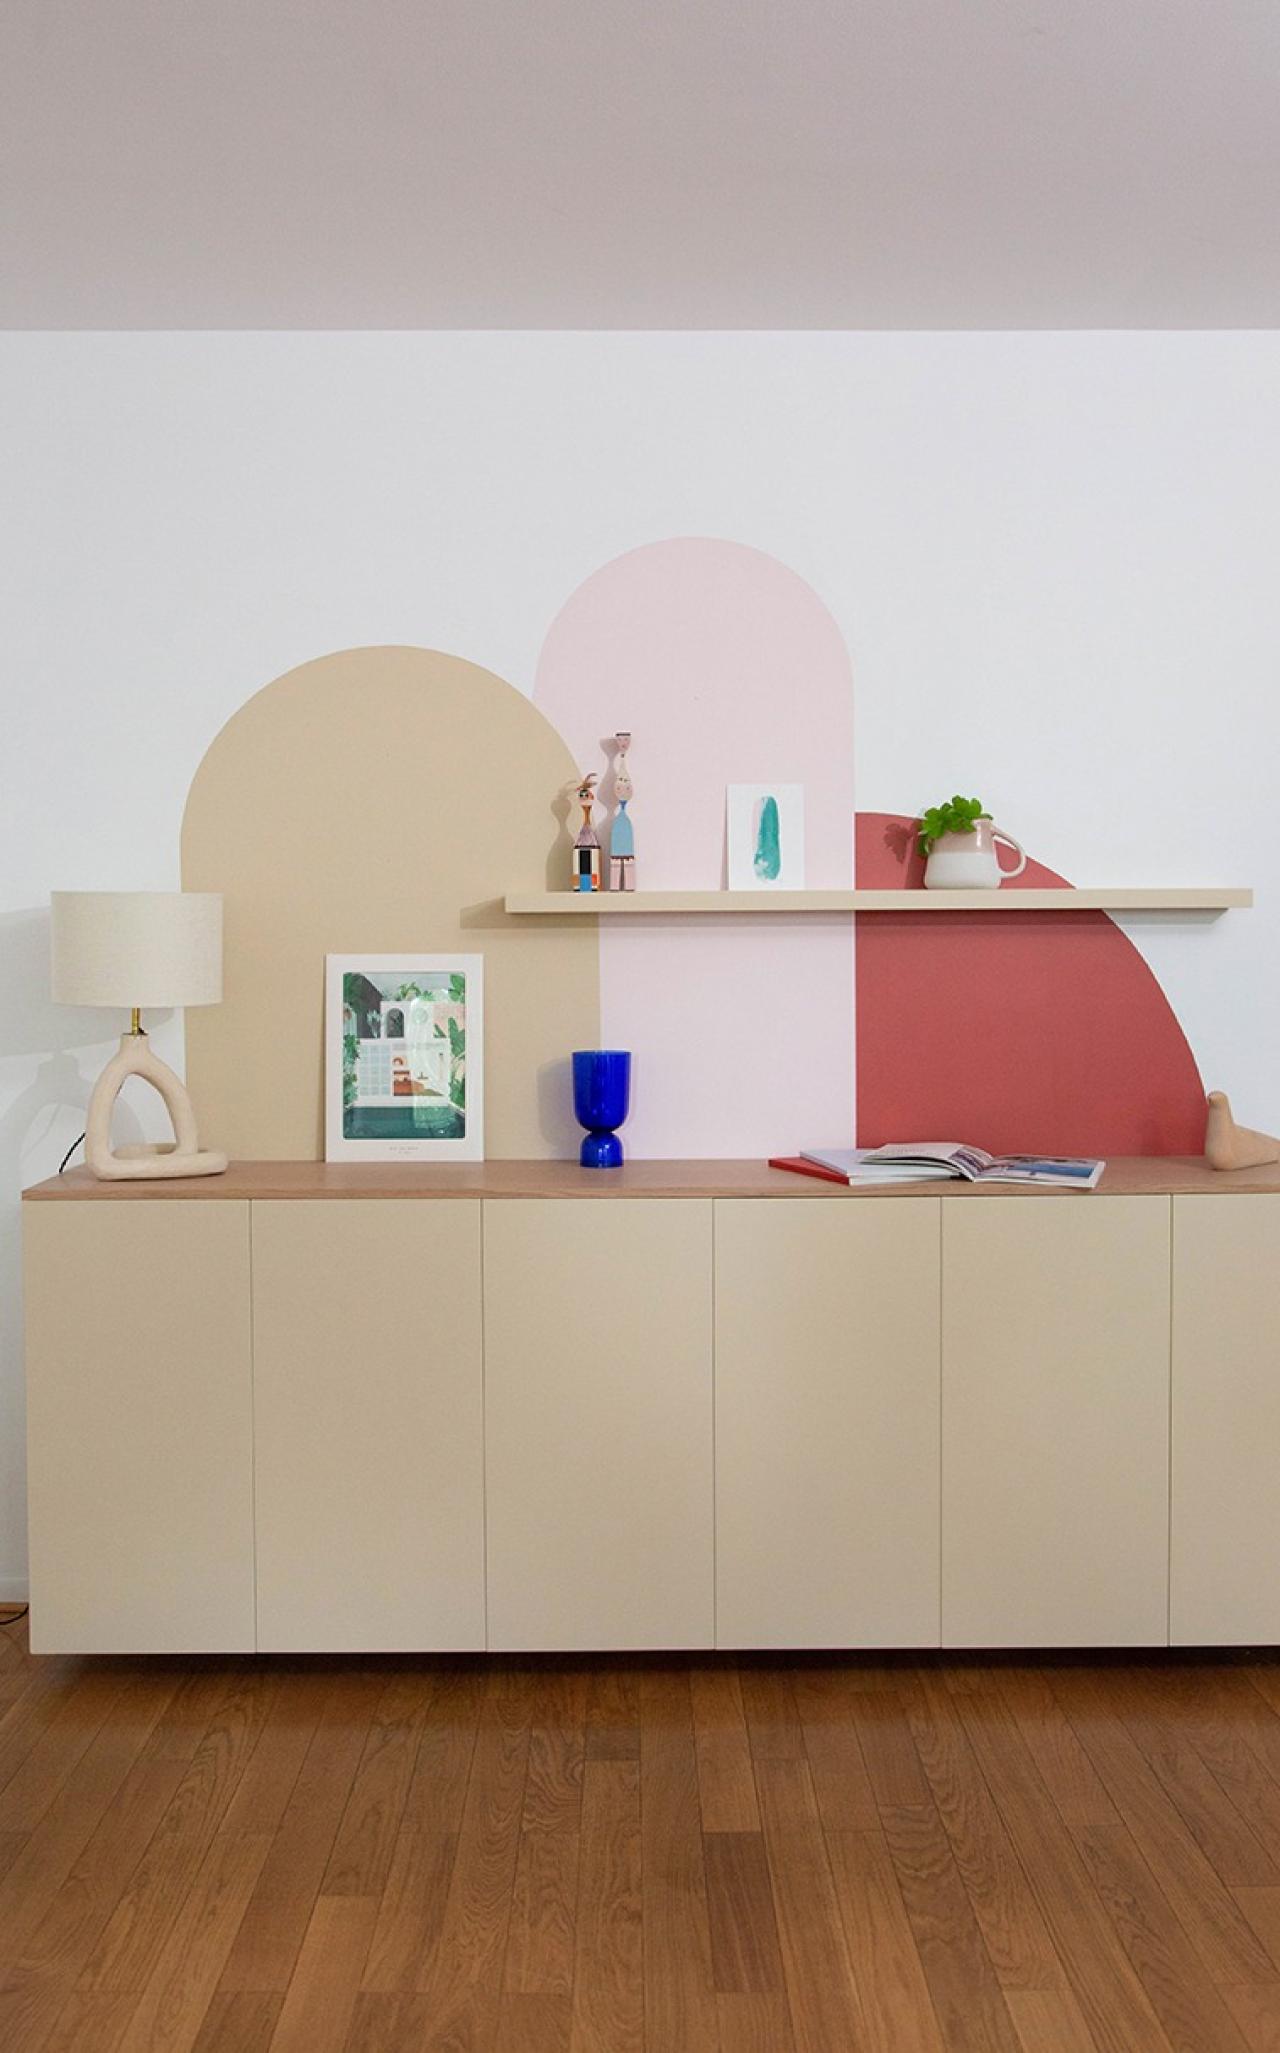 A Sable Sideboard at Amandine and Nicolas's place